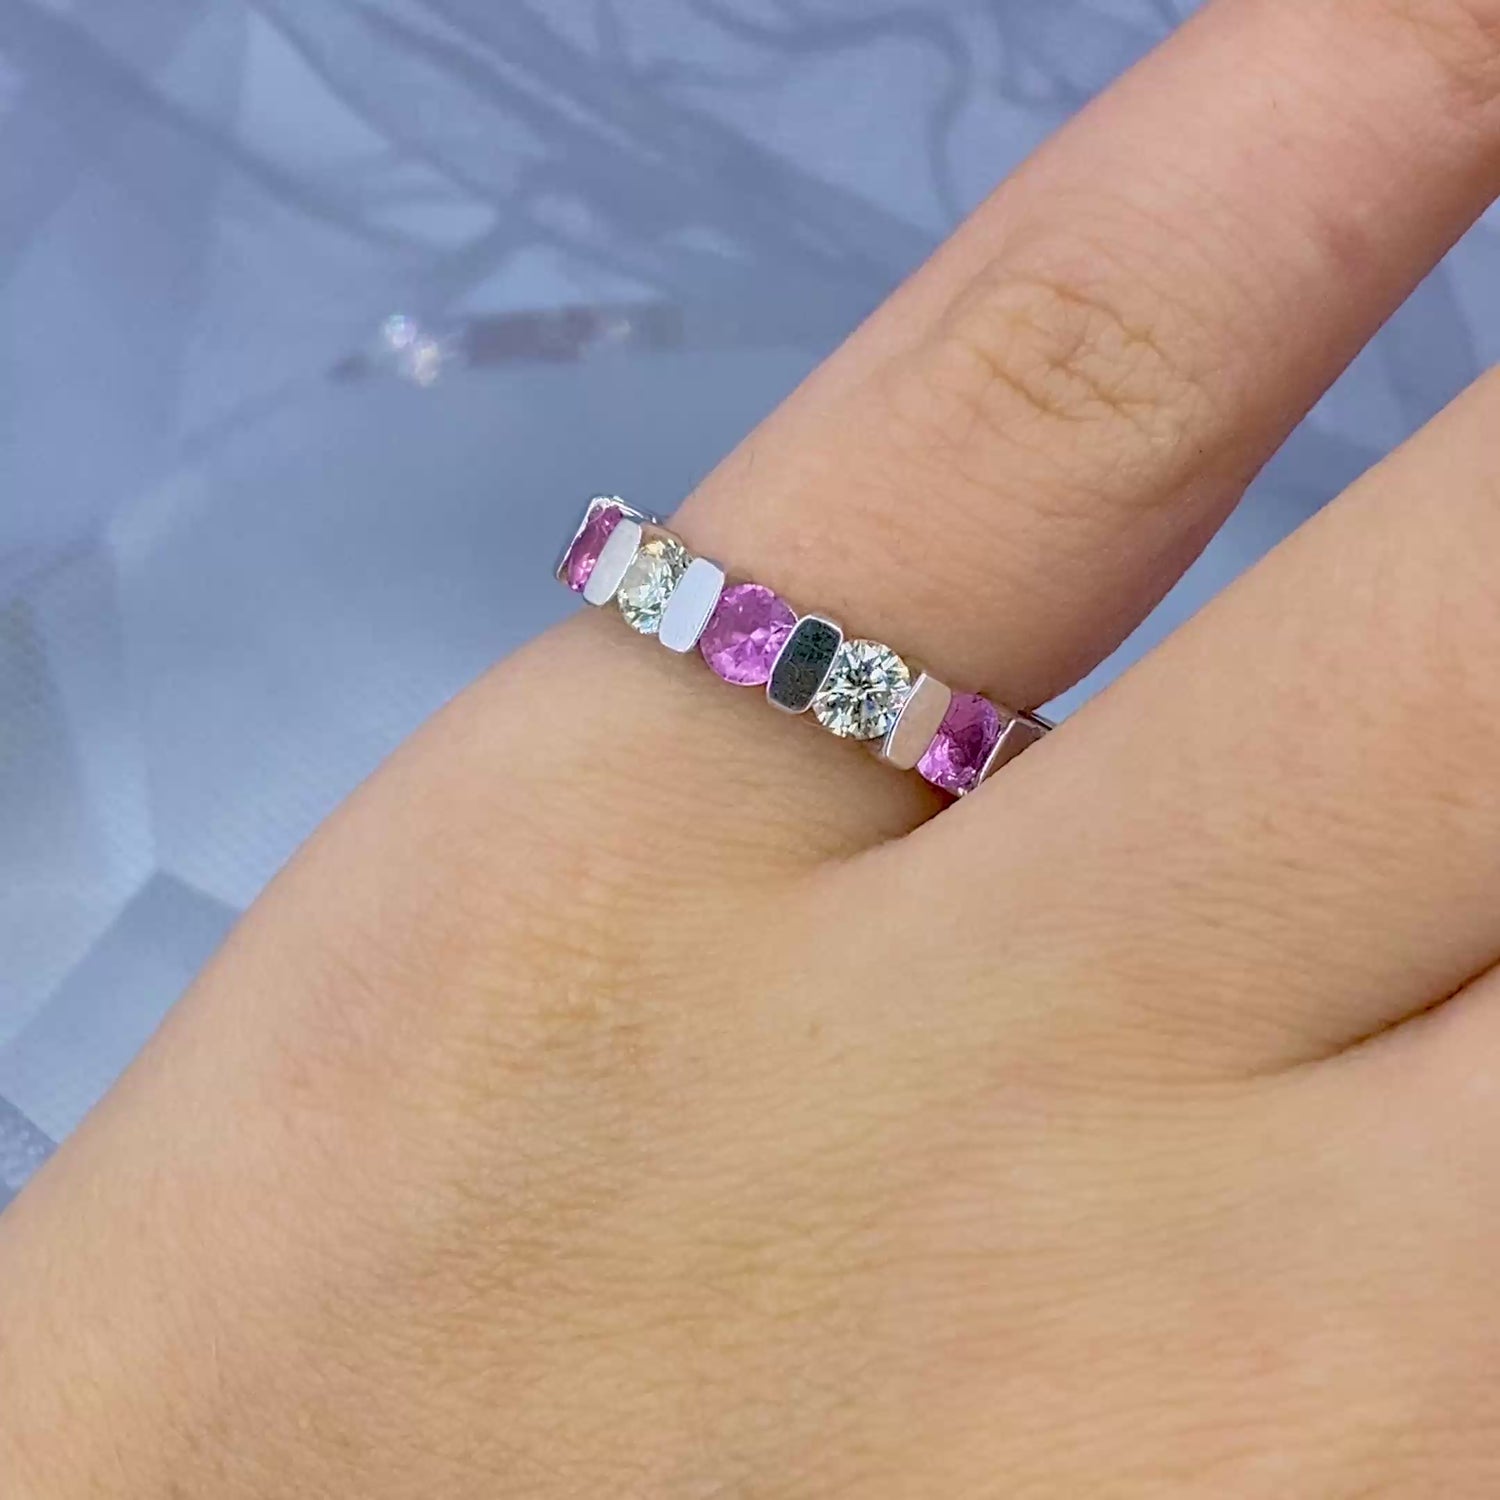 Radiant 3.20CT Round Cut Diamond and Pink Sapphire Eternity Ring in Platinum